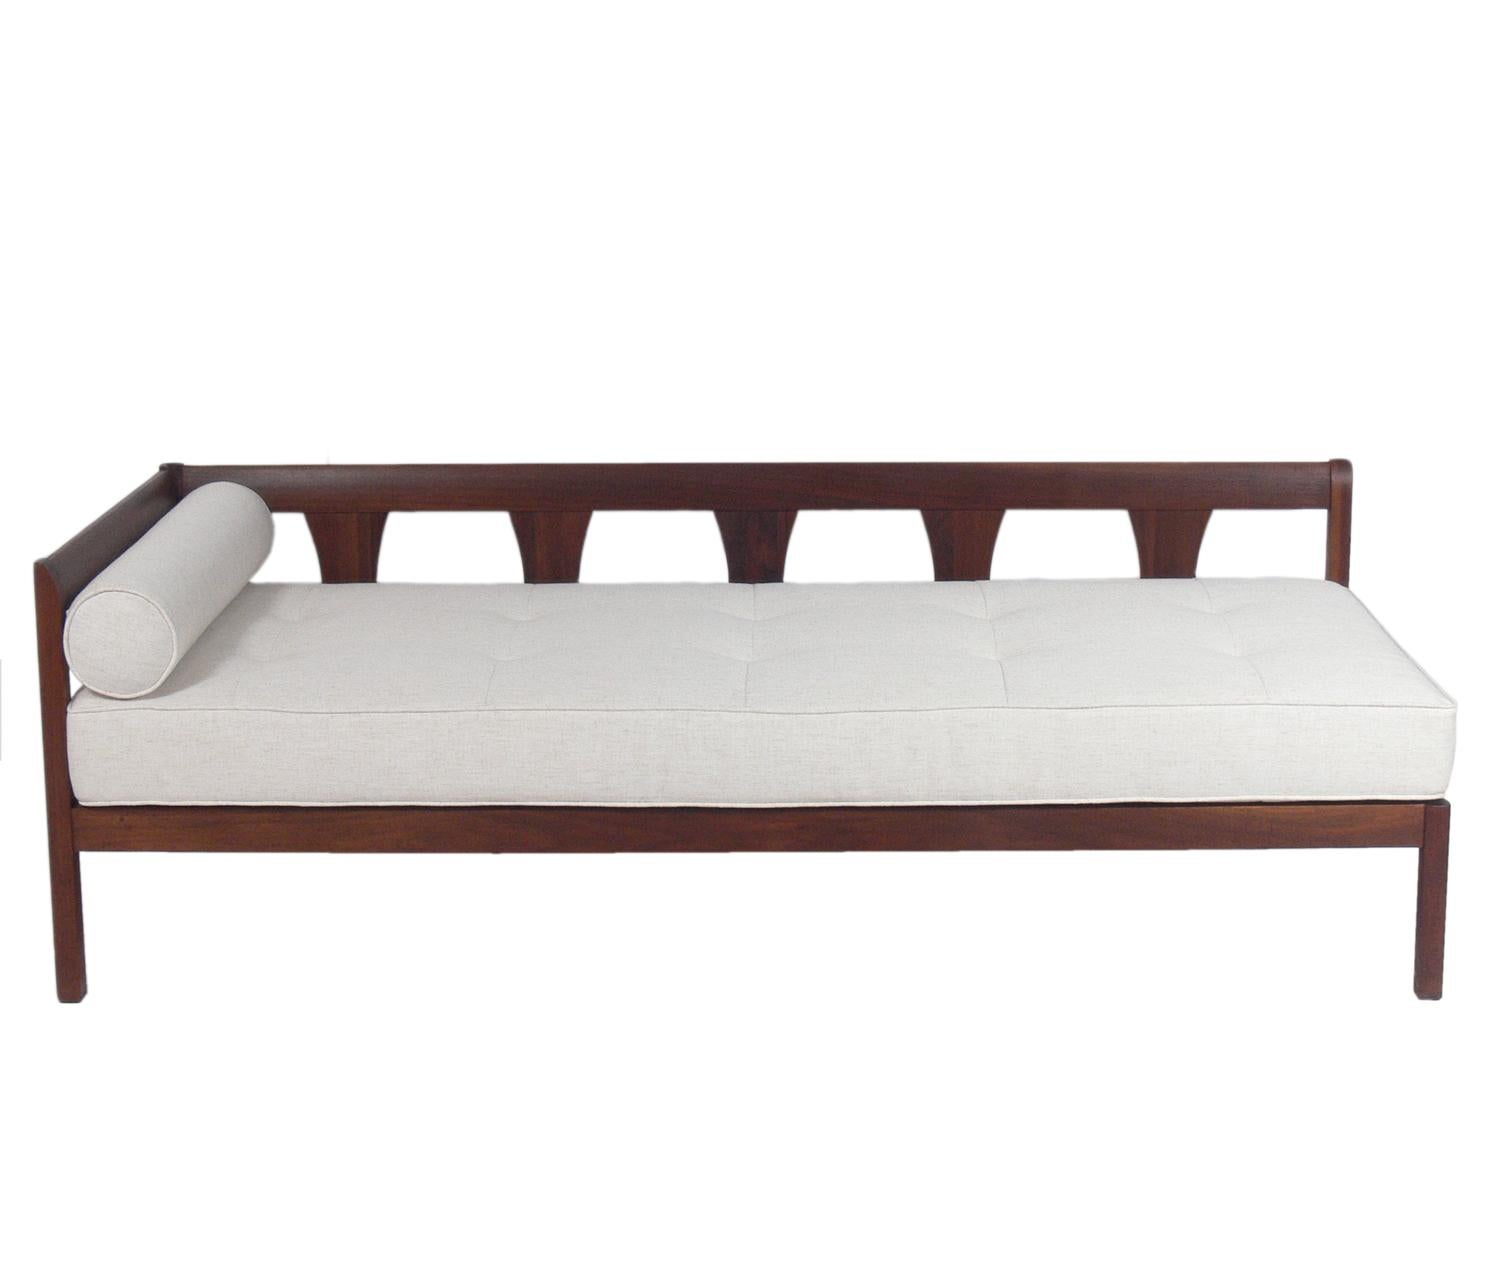 Mid-Century Modern walnut daybed, American, circa 1960s. This chaise lounge has a clean lined elegant design that would work well with Danish modern pieces. The walnut frame has been cleaned and Danish oiled. It has been reupholstered in an ivory